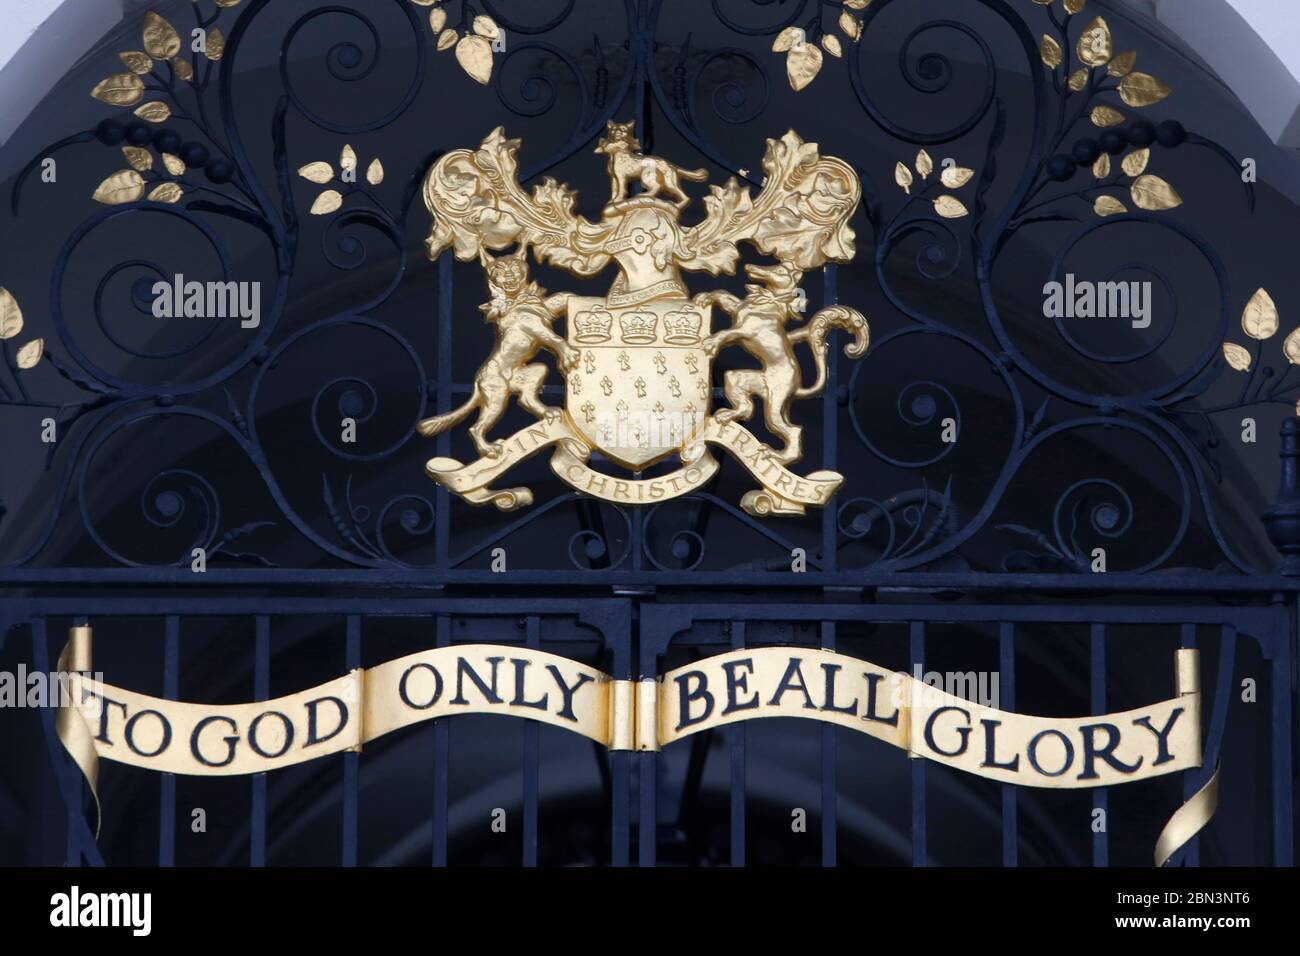 Coat of arms on a building in the City of London, U.K. Stock Photo